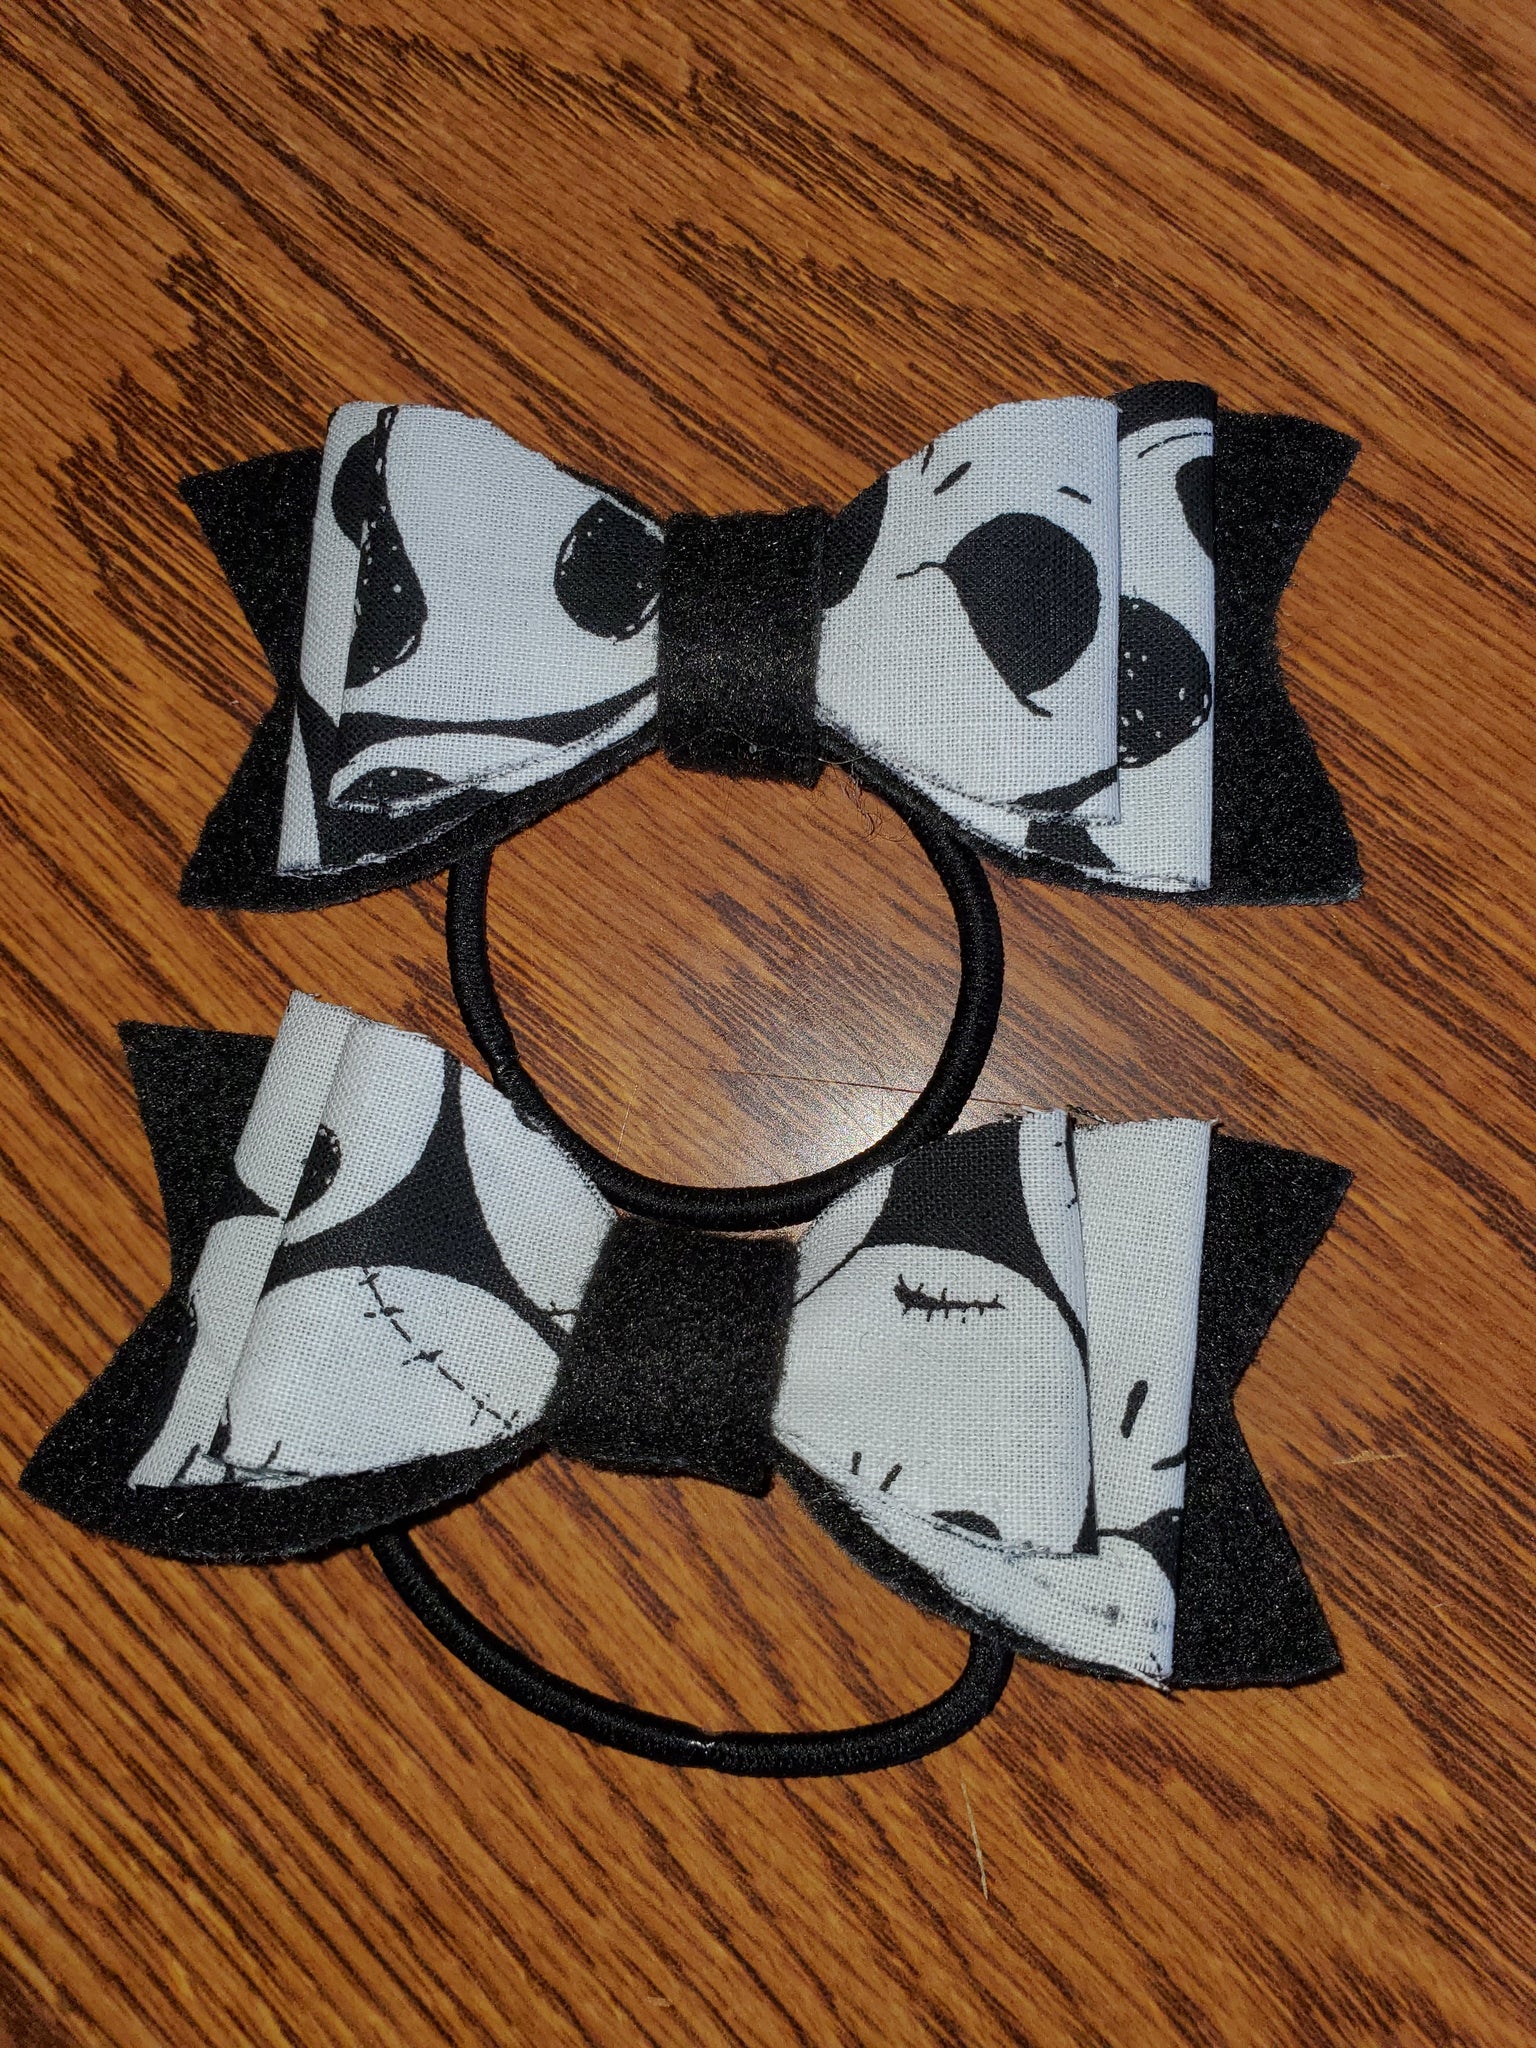 Nightmare Before Christmas Inspired Jack Skellington Small Set of 2 Hairbows/Hair Accessory